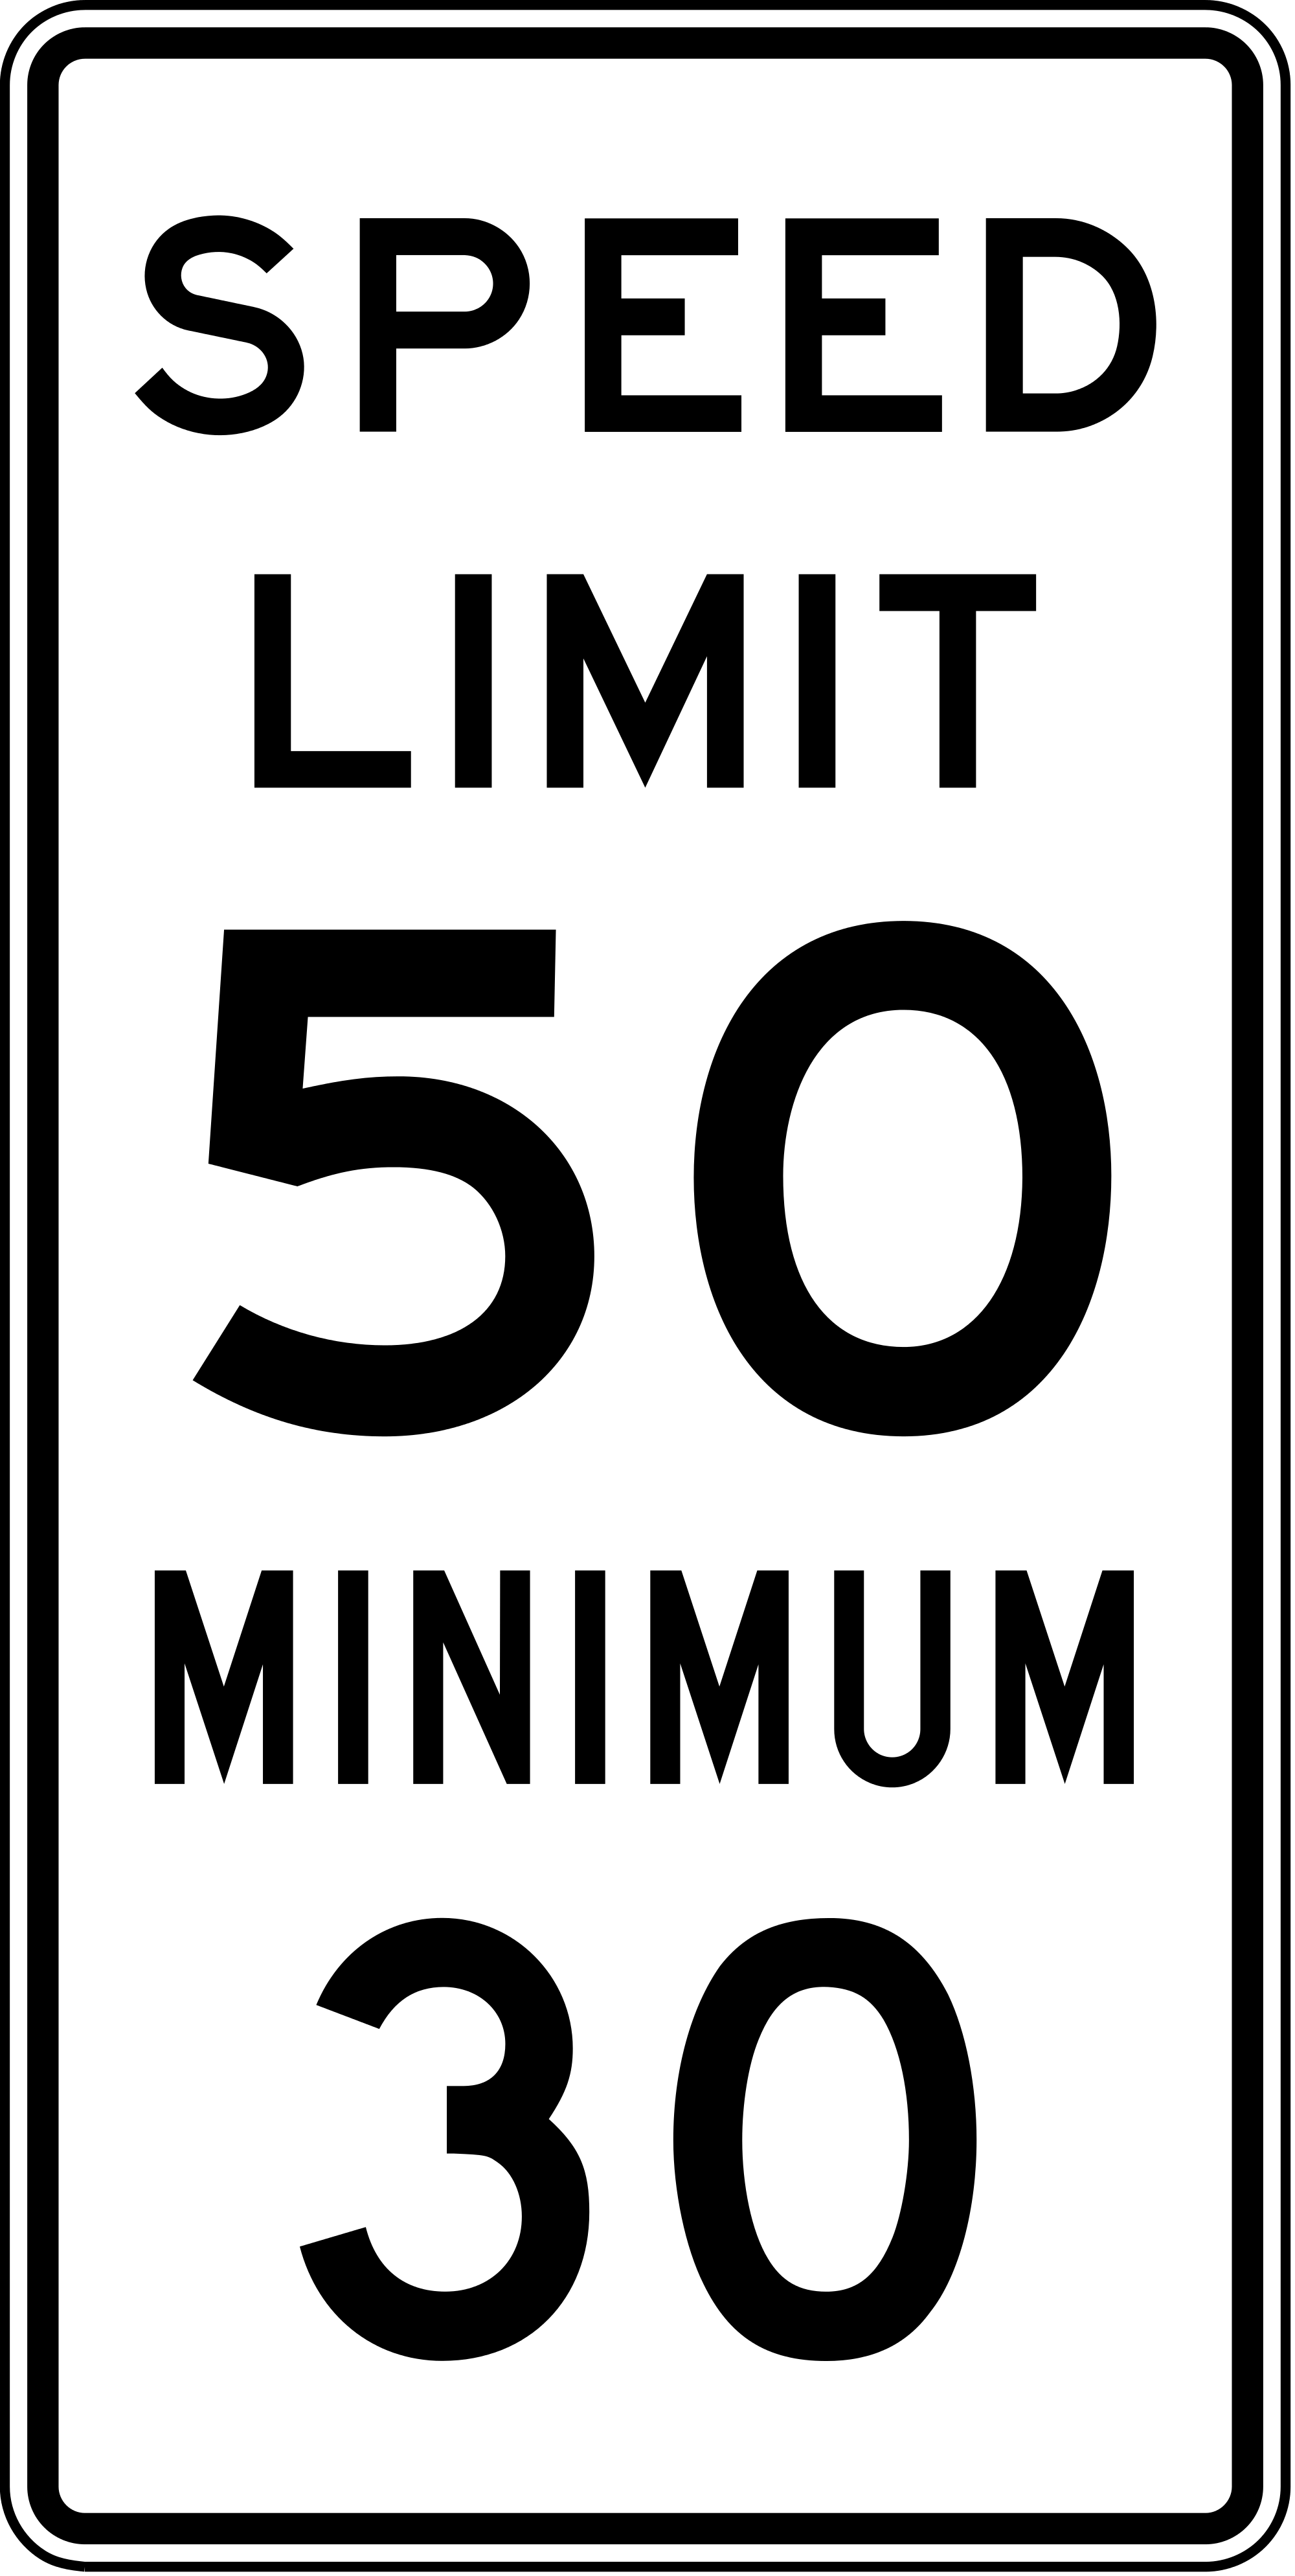 R2-4a Combined Speed Limit English Regulatory Sign